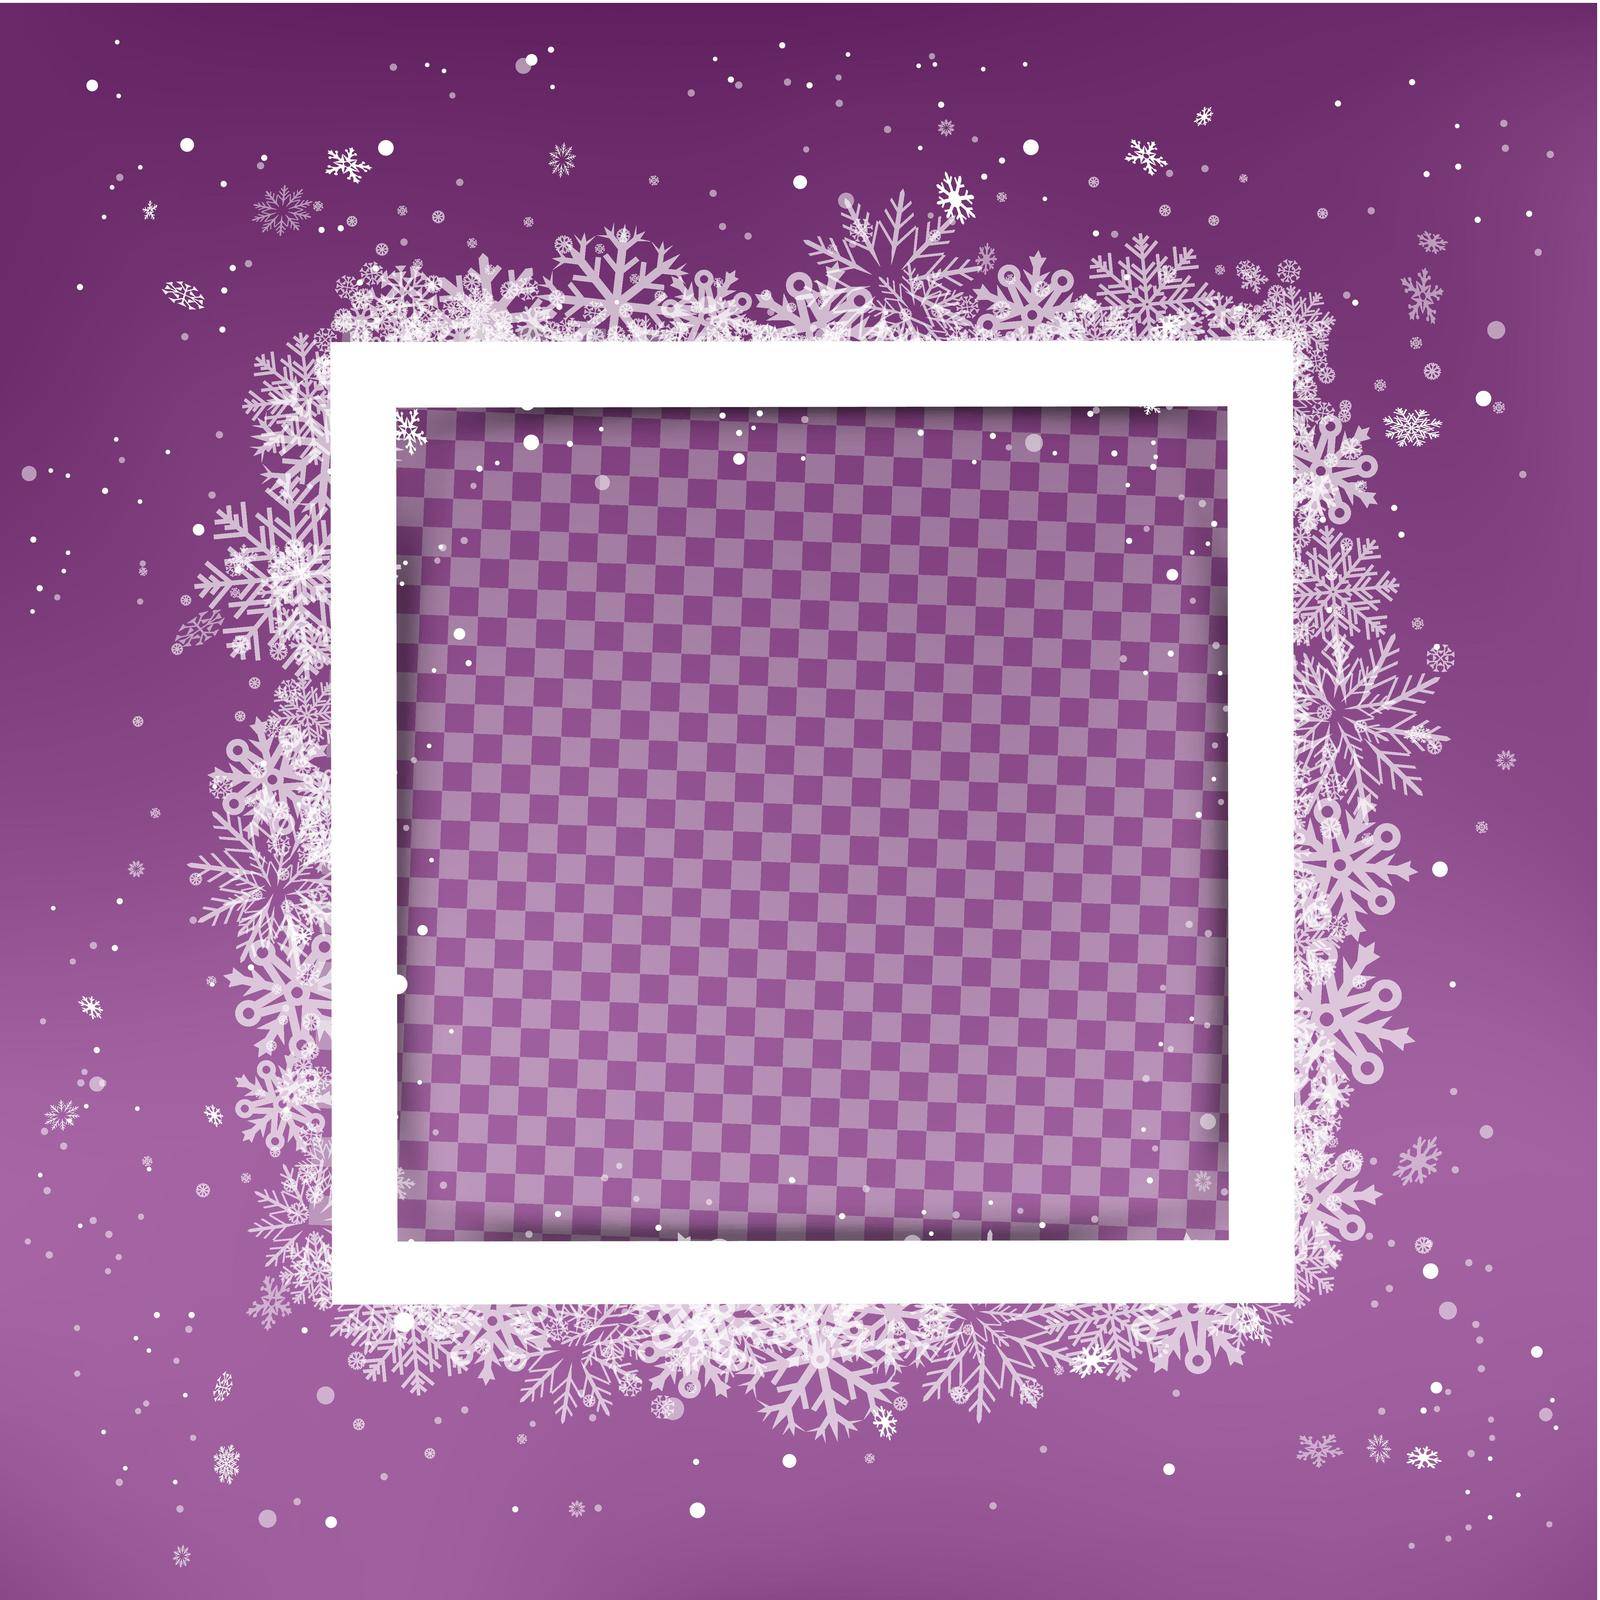 Christmas snow photo frame with shadow om purple background. Holiday winter snowfall season backdrop. Seasonal picture decoration template